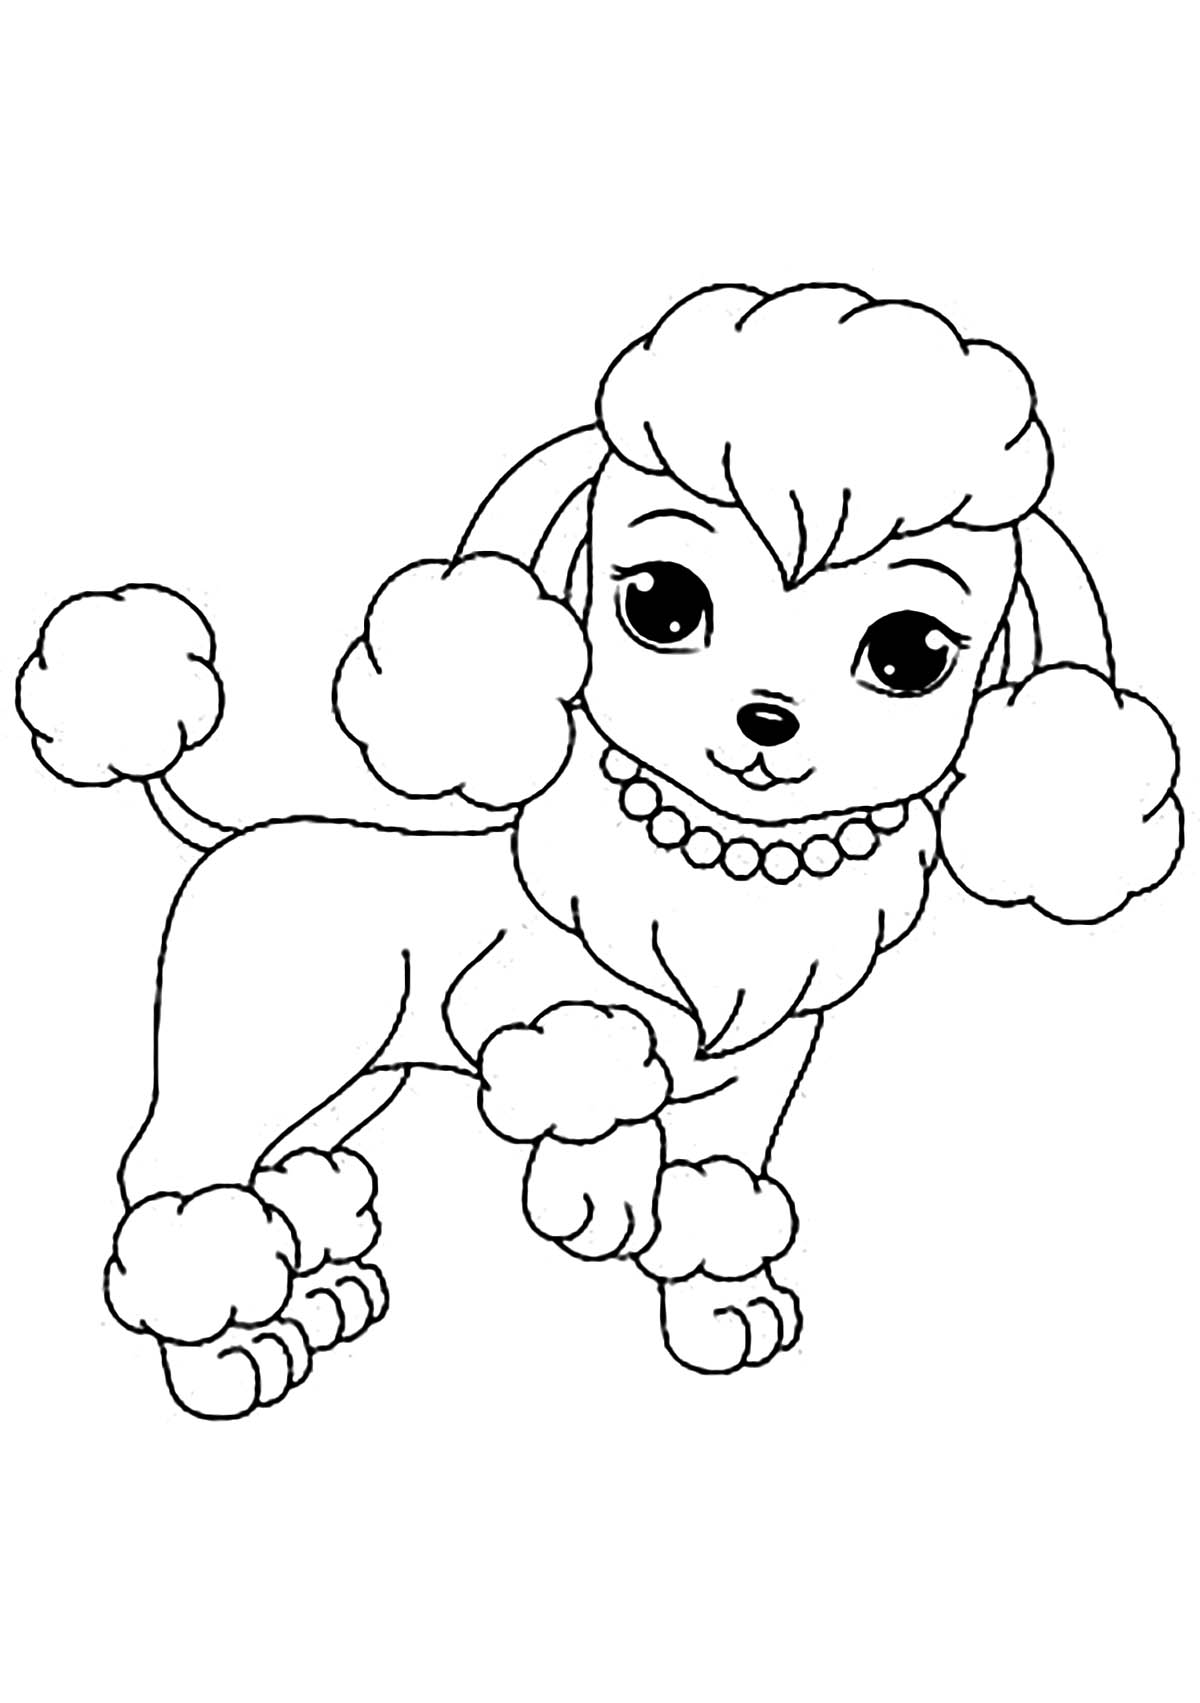 Dog and collar - Dogs Kids Coloring Pages